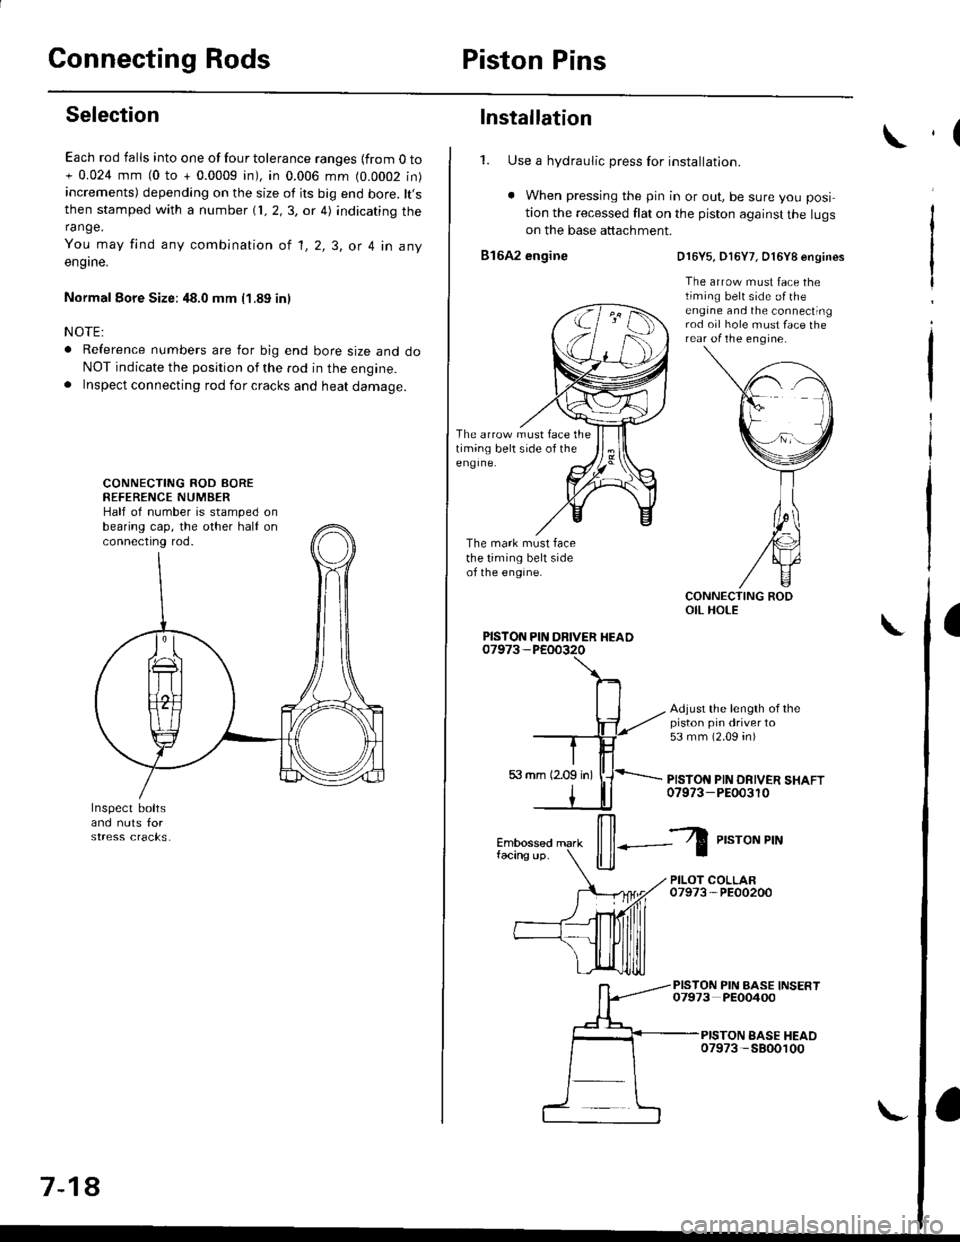 HONDA CIVIC 2000 6.G Repair Manual Connecting RodsPiston Pins
Selection
Each rod falls into one of four tolerance ranges {from O to+ 0.024 mm (0 to + 0.0009 in), in 0.006 mm (0.0002 in)increments) depending on the size of its big end b